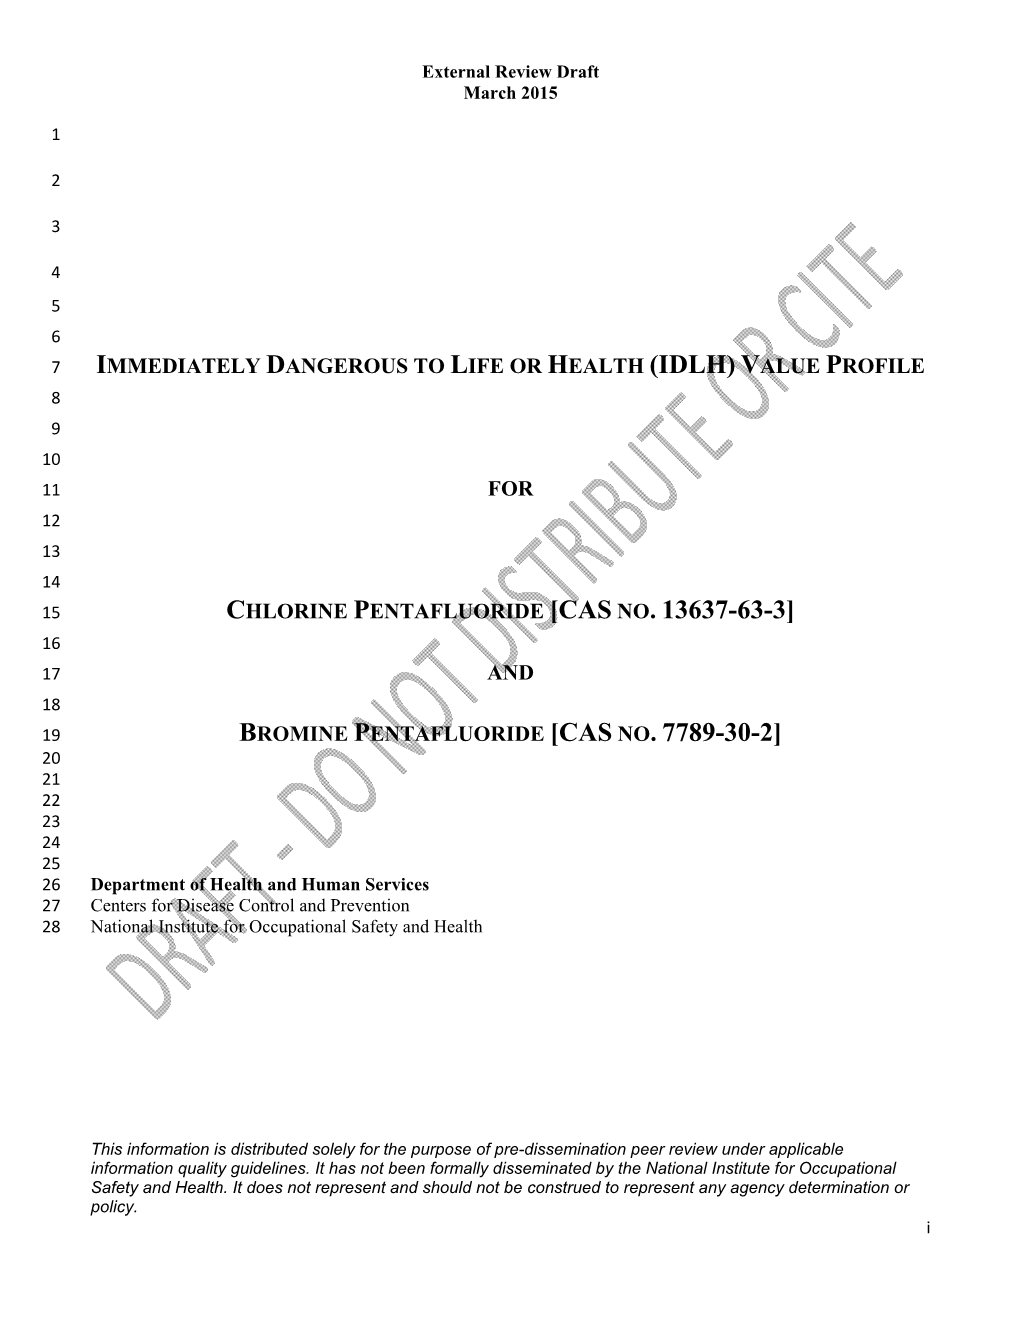 Immediately Dangerous to Life Or Health (Idlh) Value Profile for Chlorine Pentafluoride [Cas No. 13637-63-3] and Bromine Pentafl